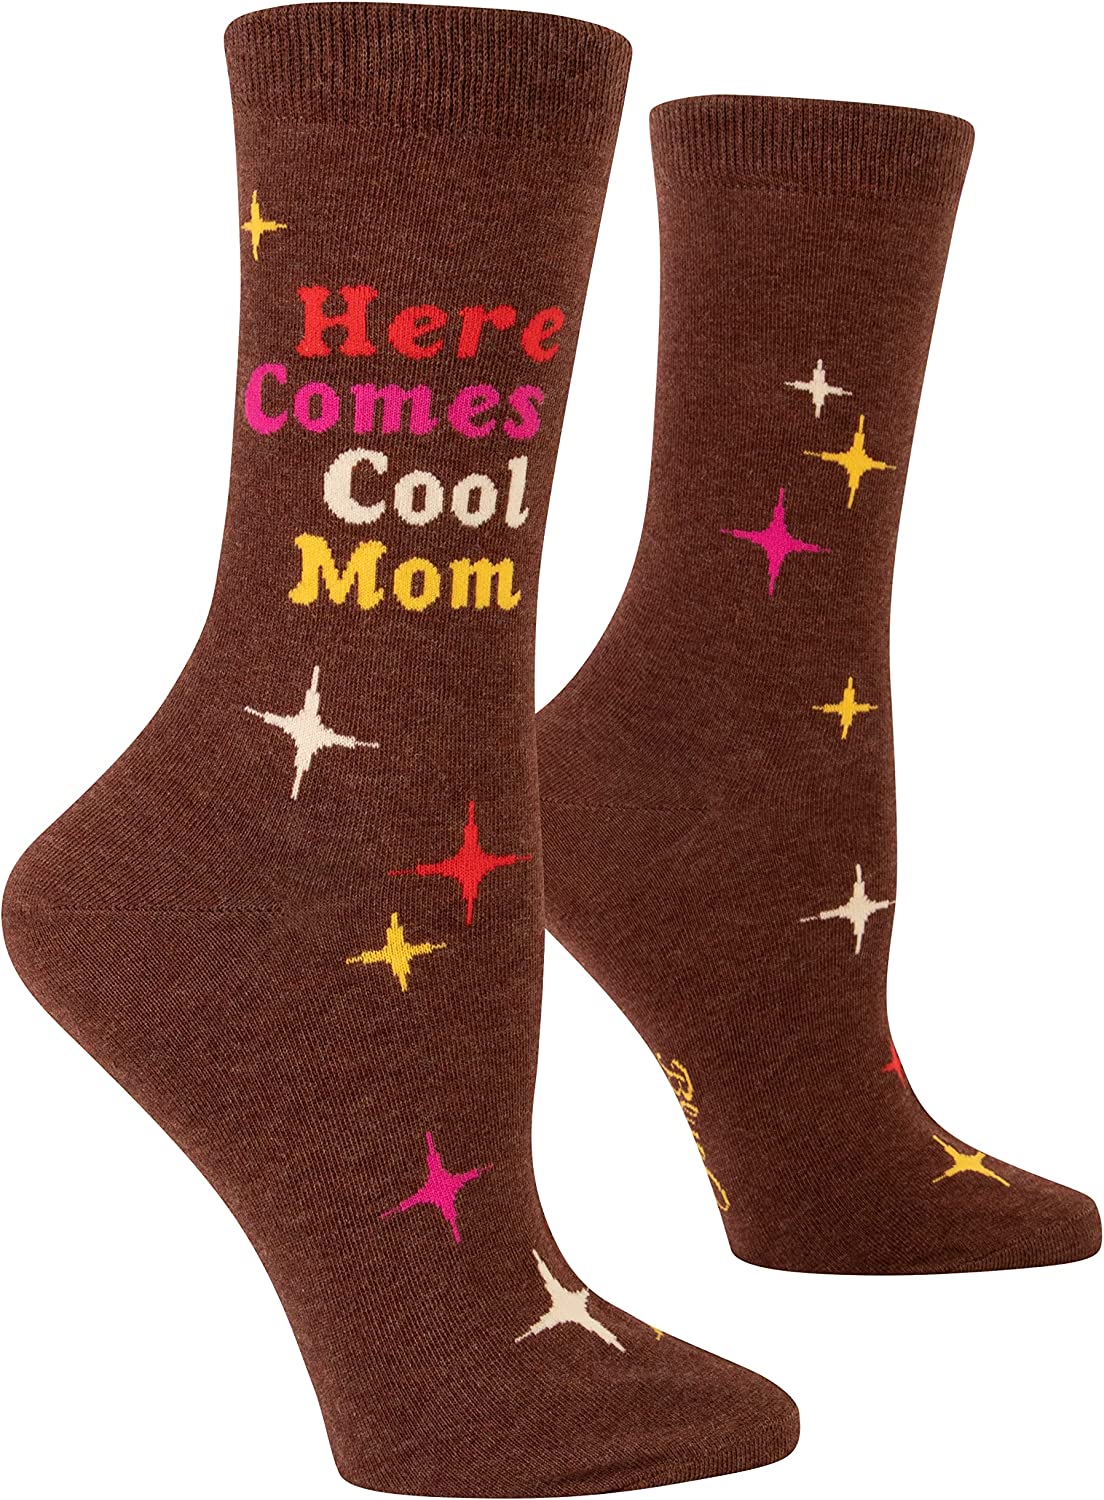 A pair of brown women's socks on foot forms with a pattern of yellow, white and pink twinkling stars and text that reads 